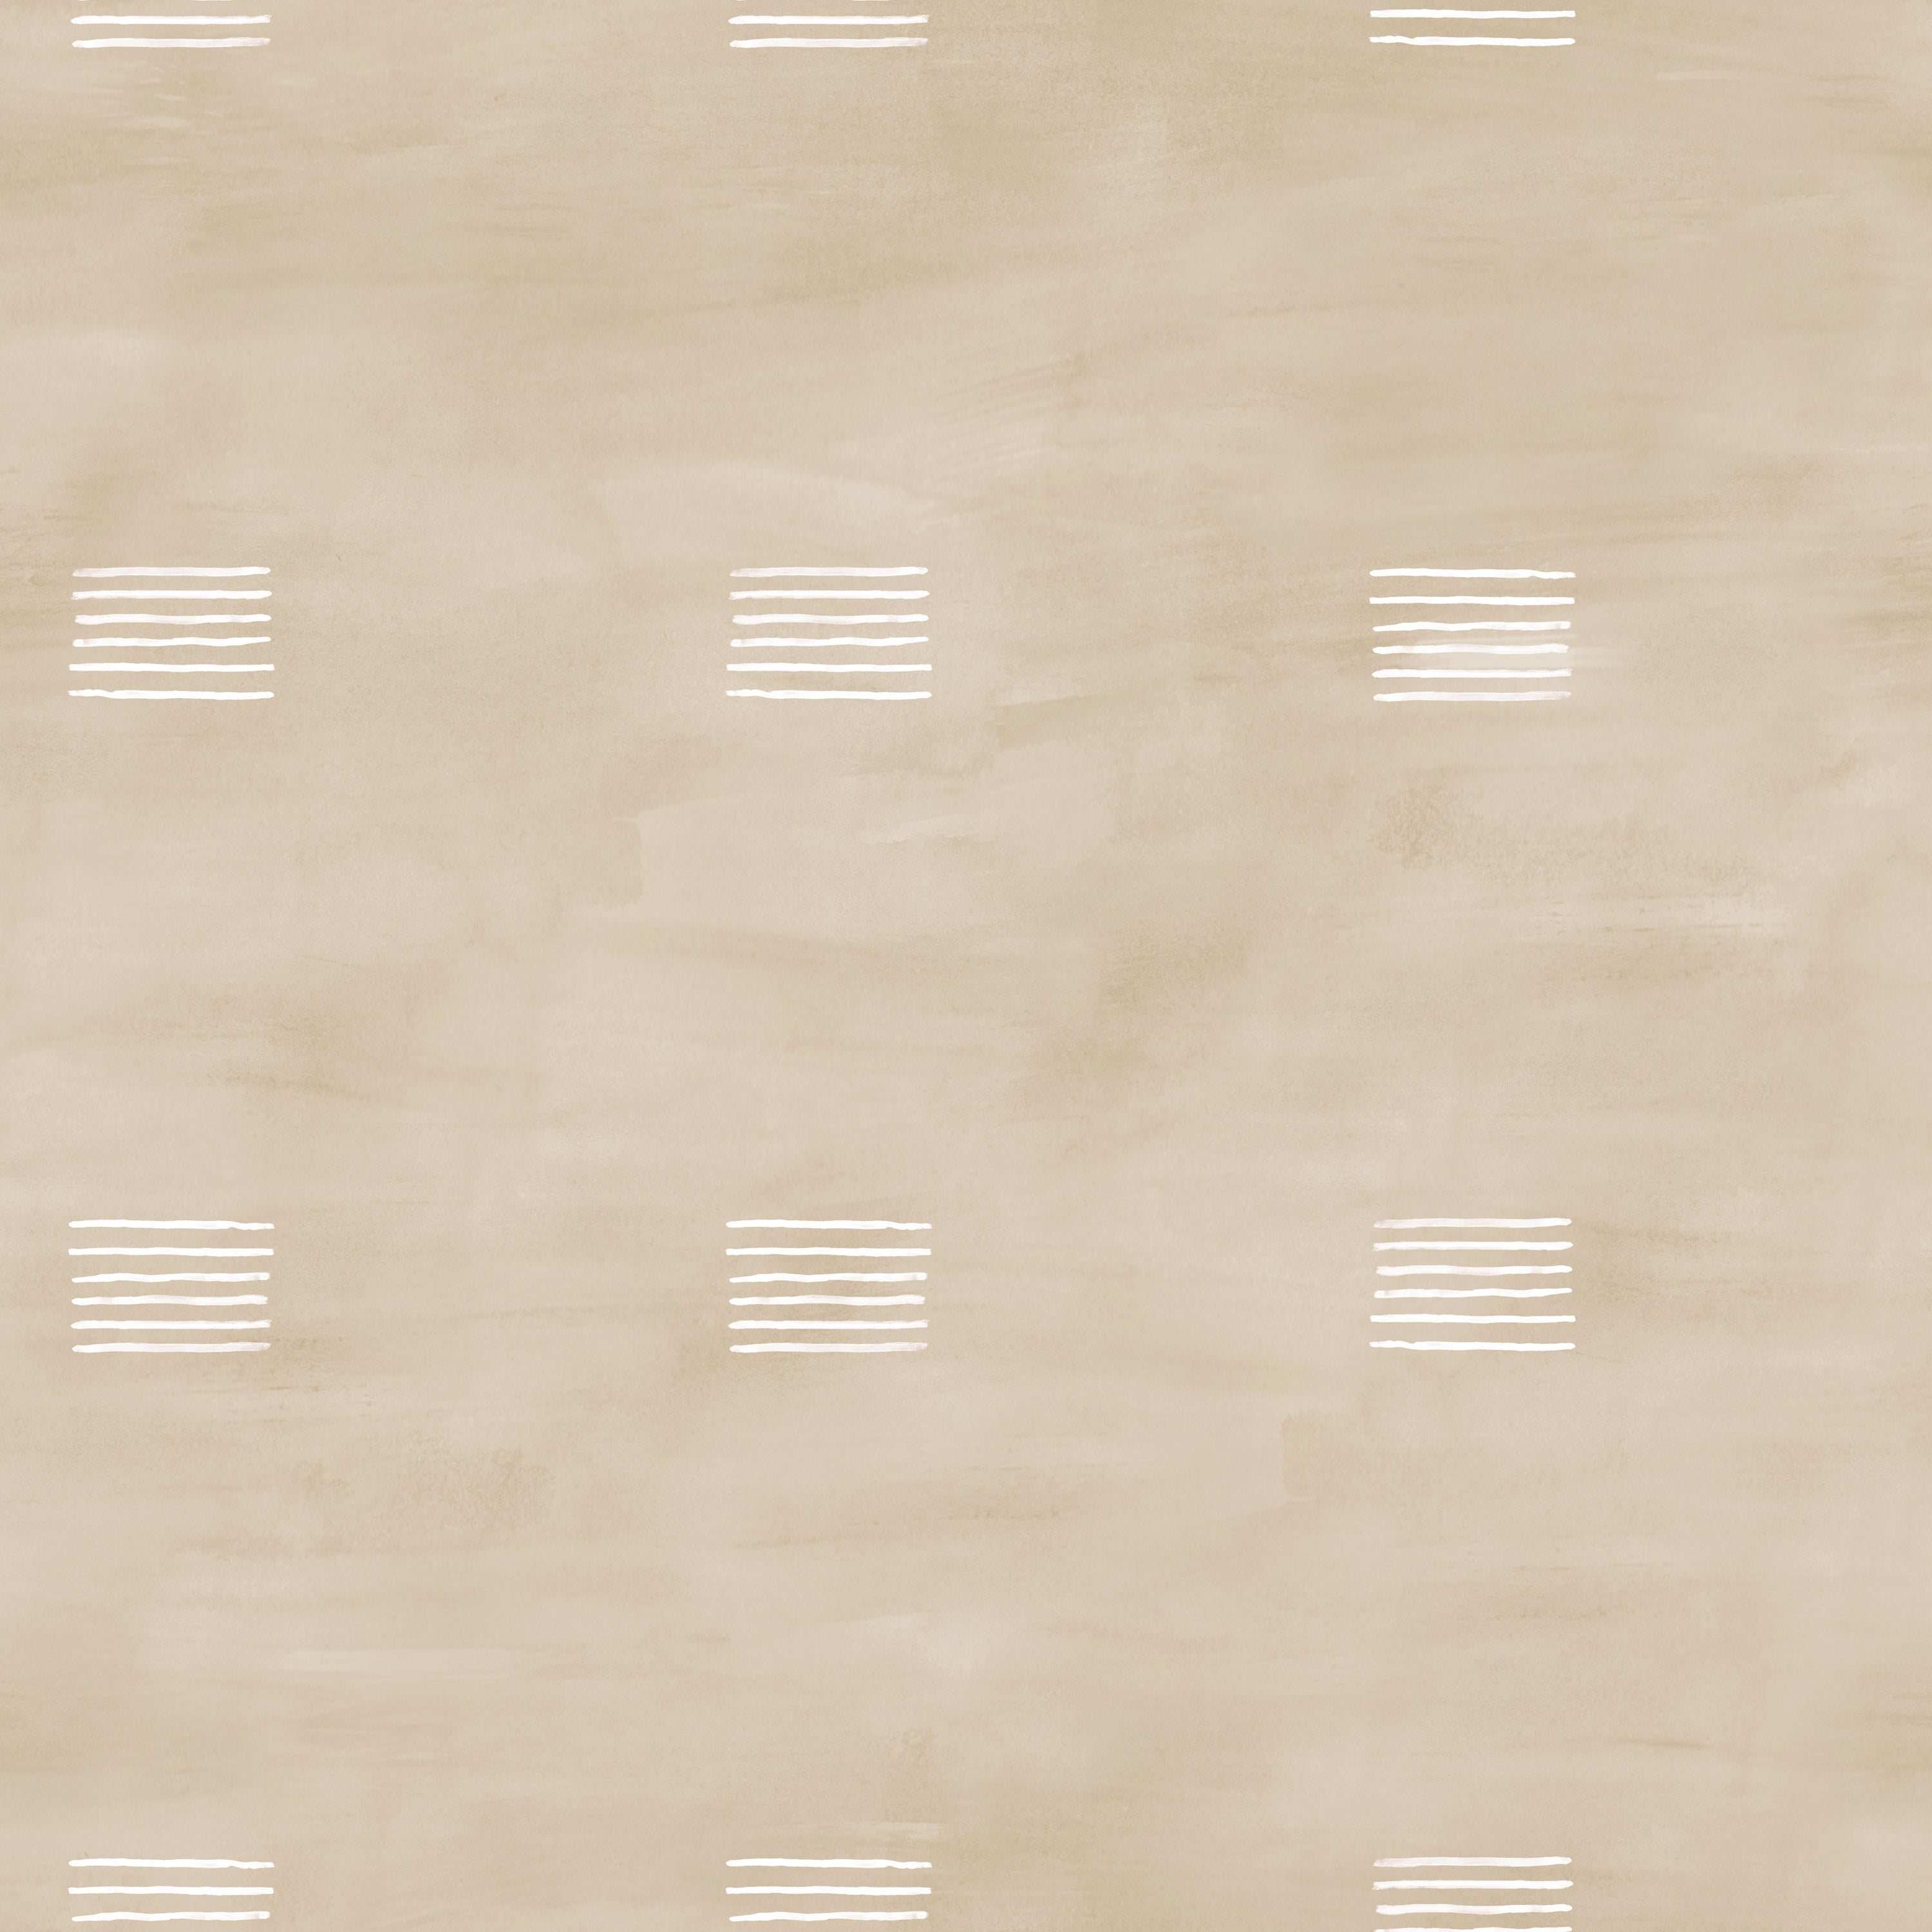 Detail of wallpaper in a gridded dash print in white on a tan field.